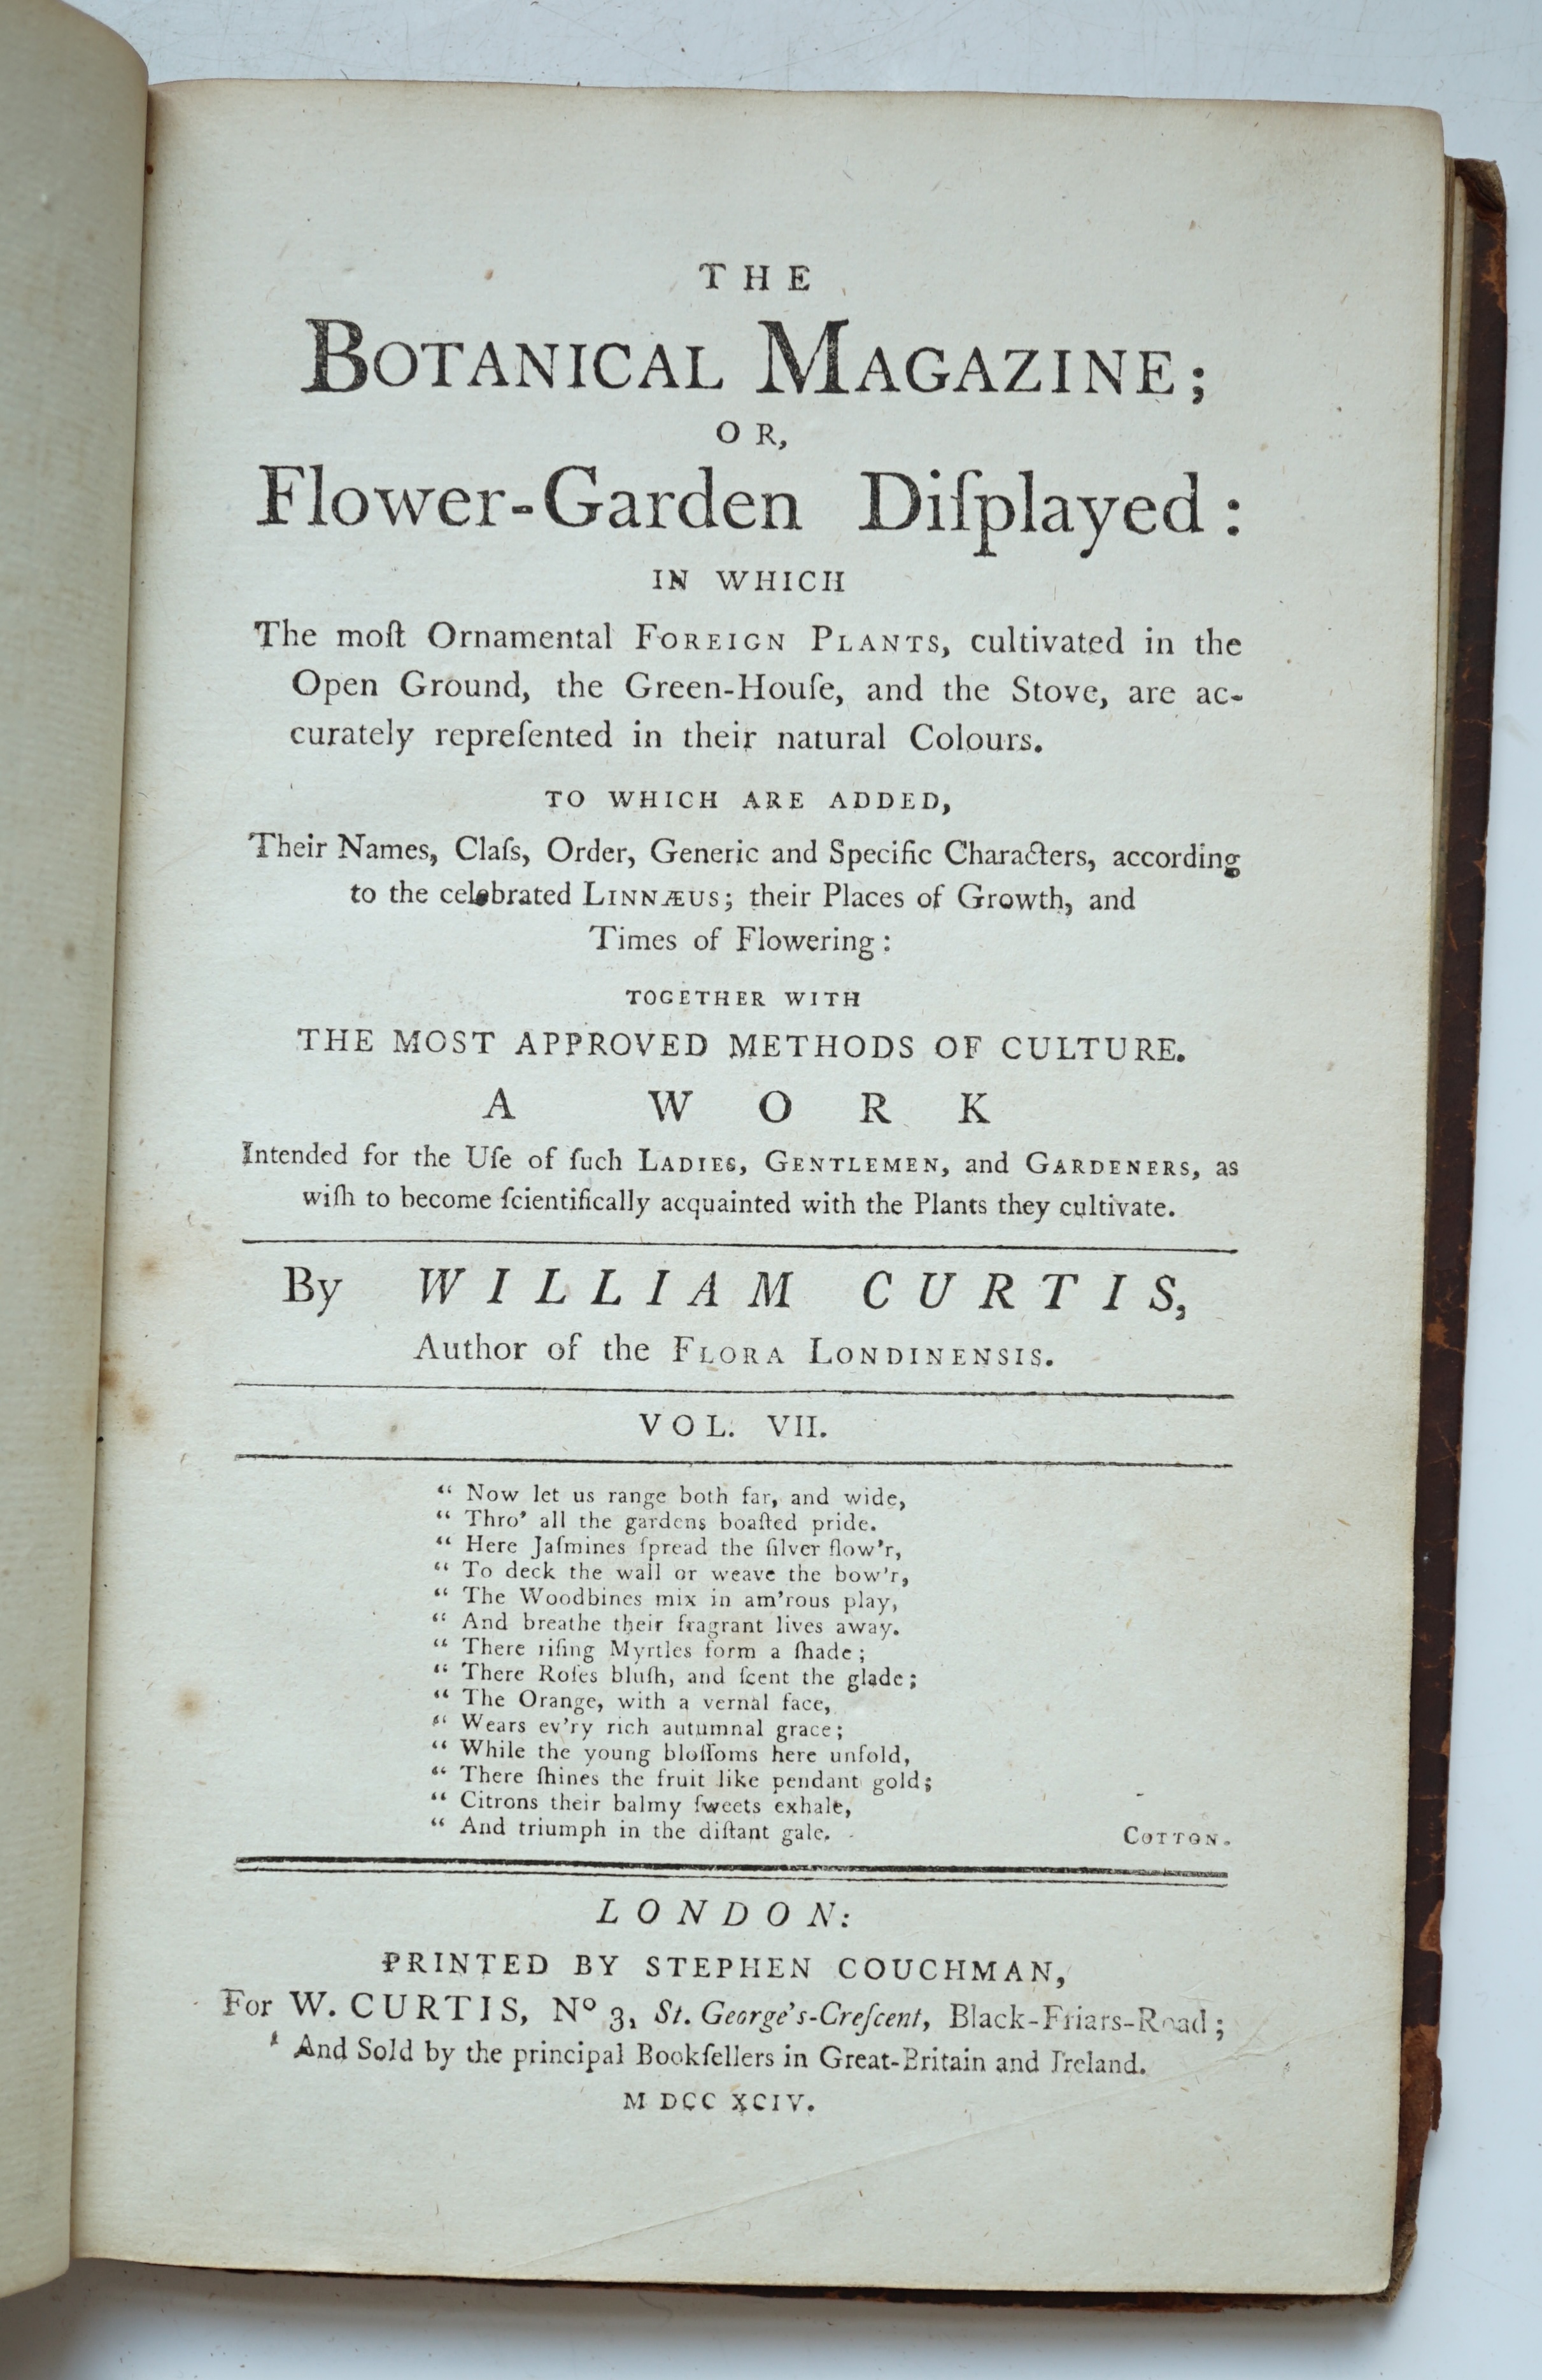 Curtis, William - The Botanical Magazine; or, Flower-Garden Displayed, vol. 7 only, 34 hand-coloured engraved plates, 8vo, calf, joints split, London, 1794